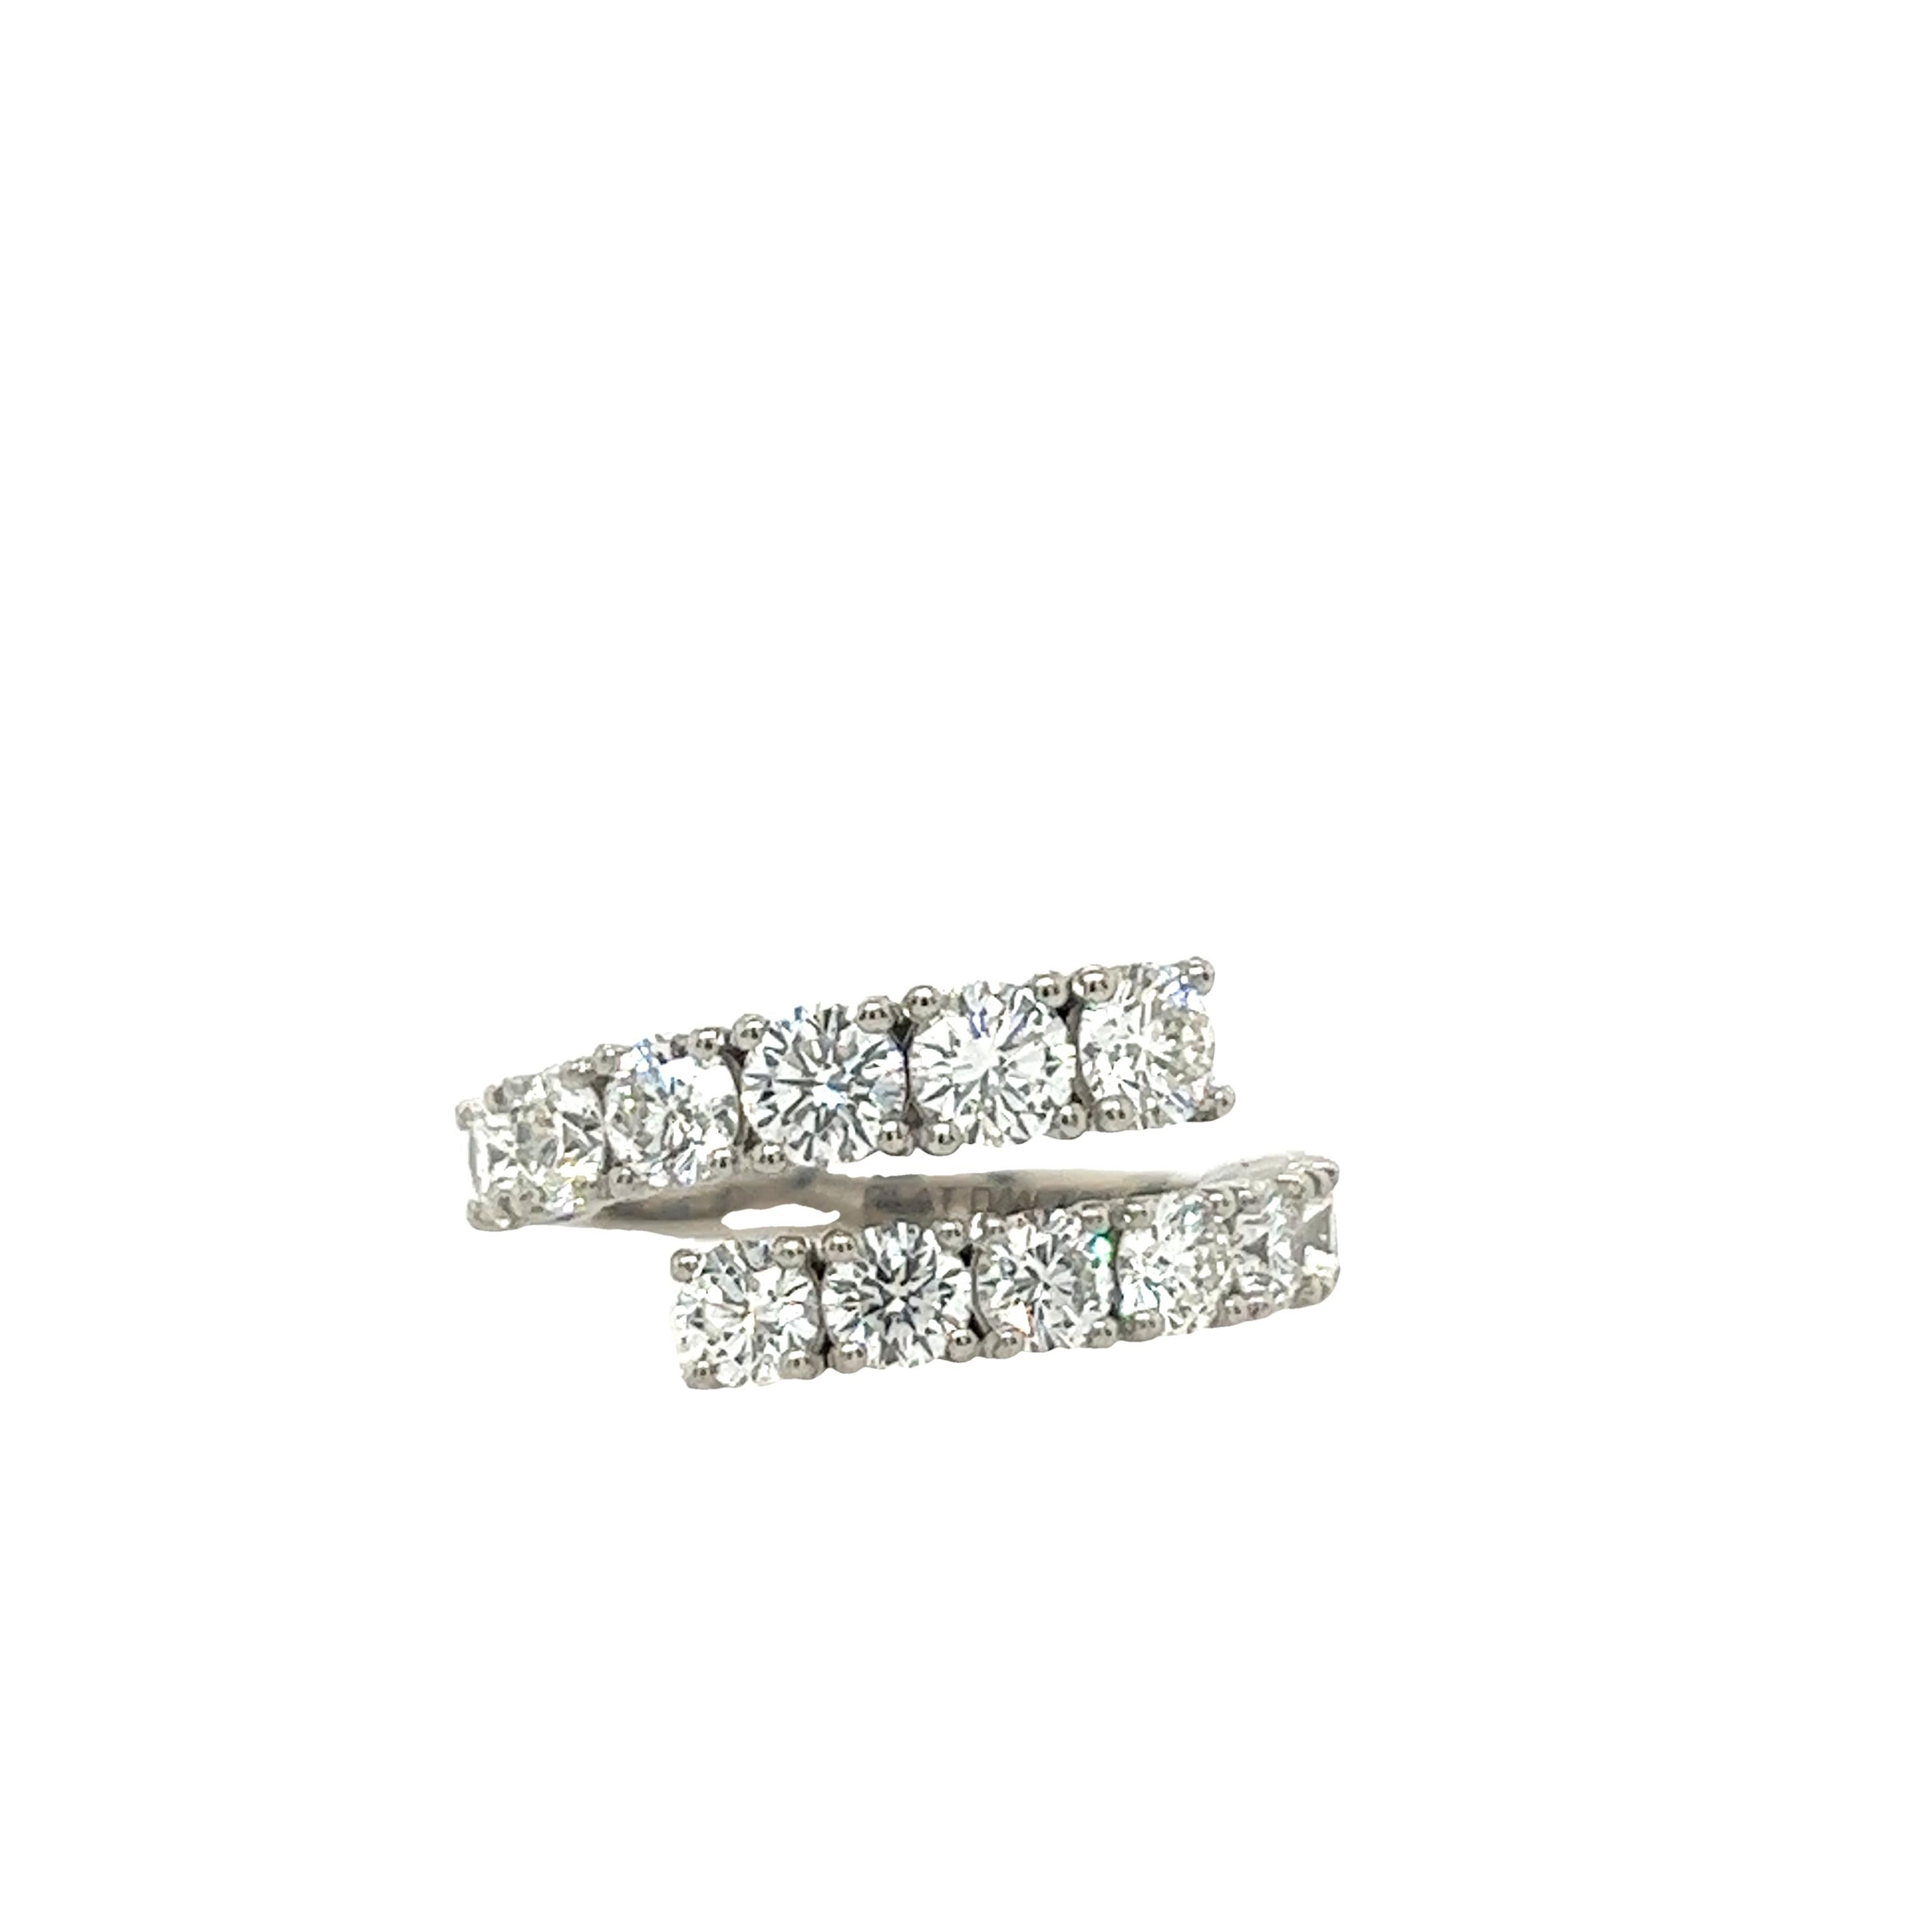 Round Cut Diamond Coil Dress Ring, Set With 2.80ct G/VS1 Round Diamonds Set In Platinum For Sale